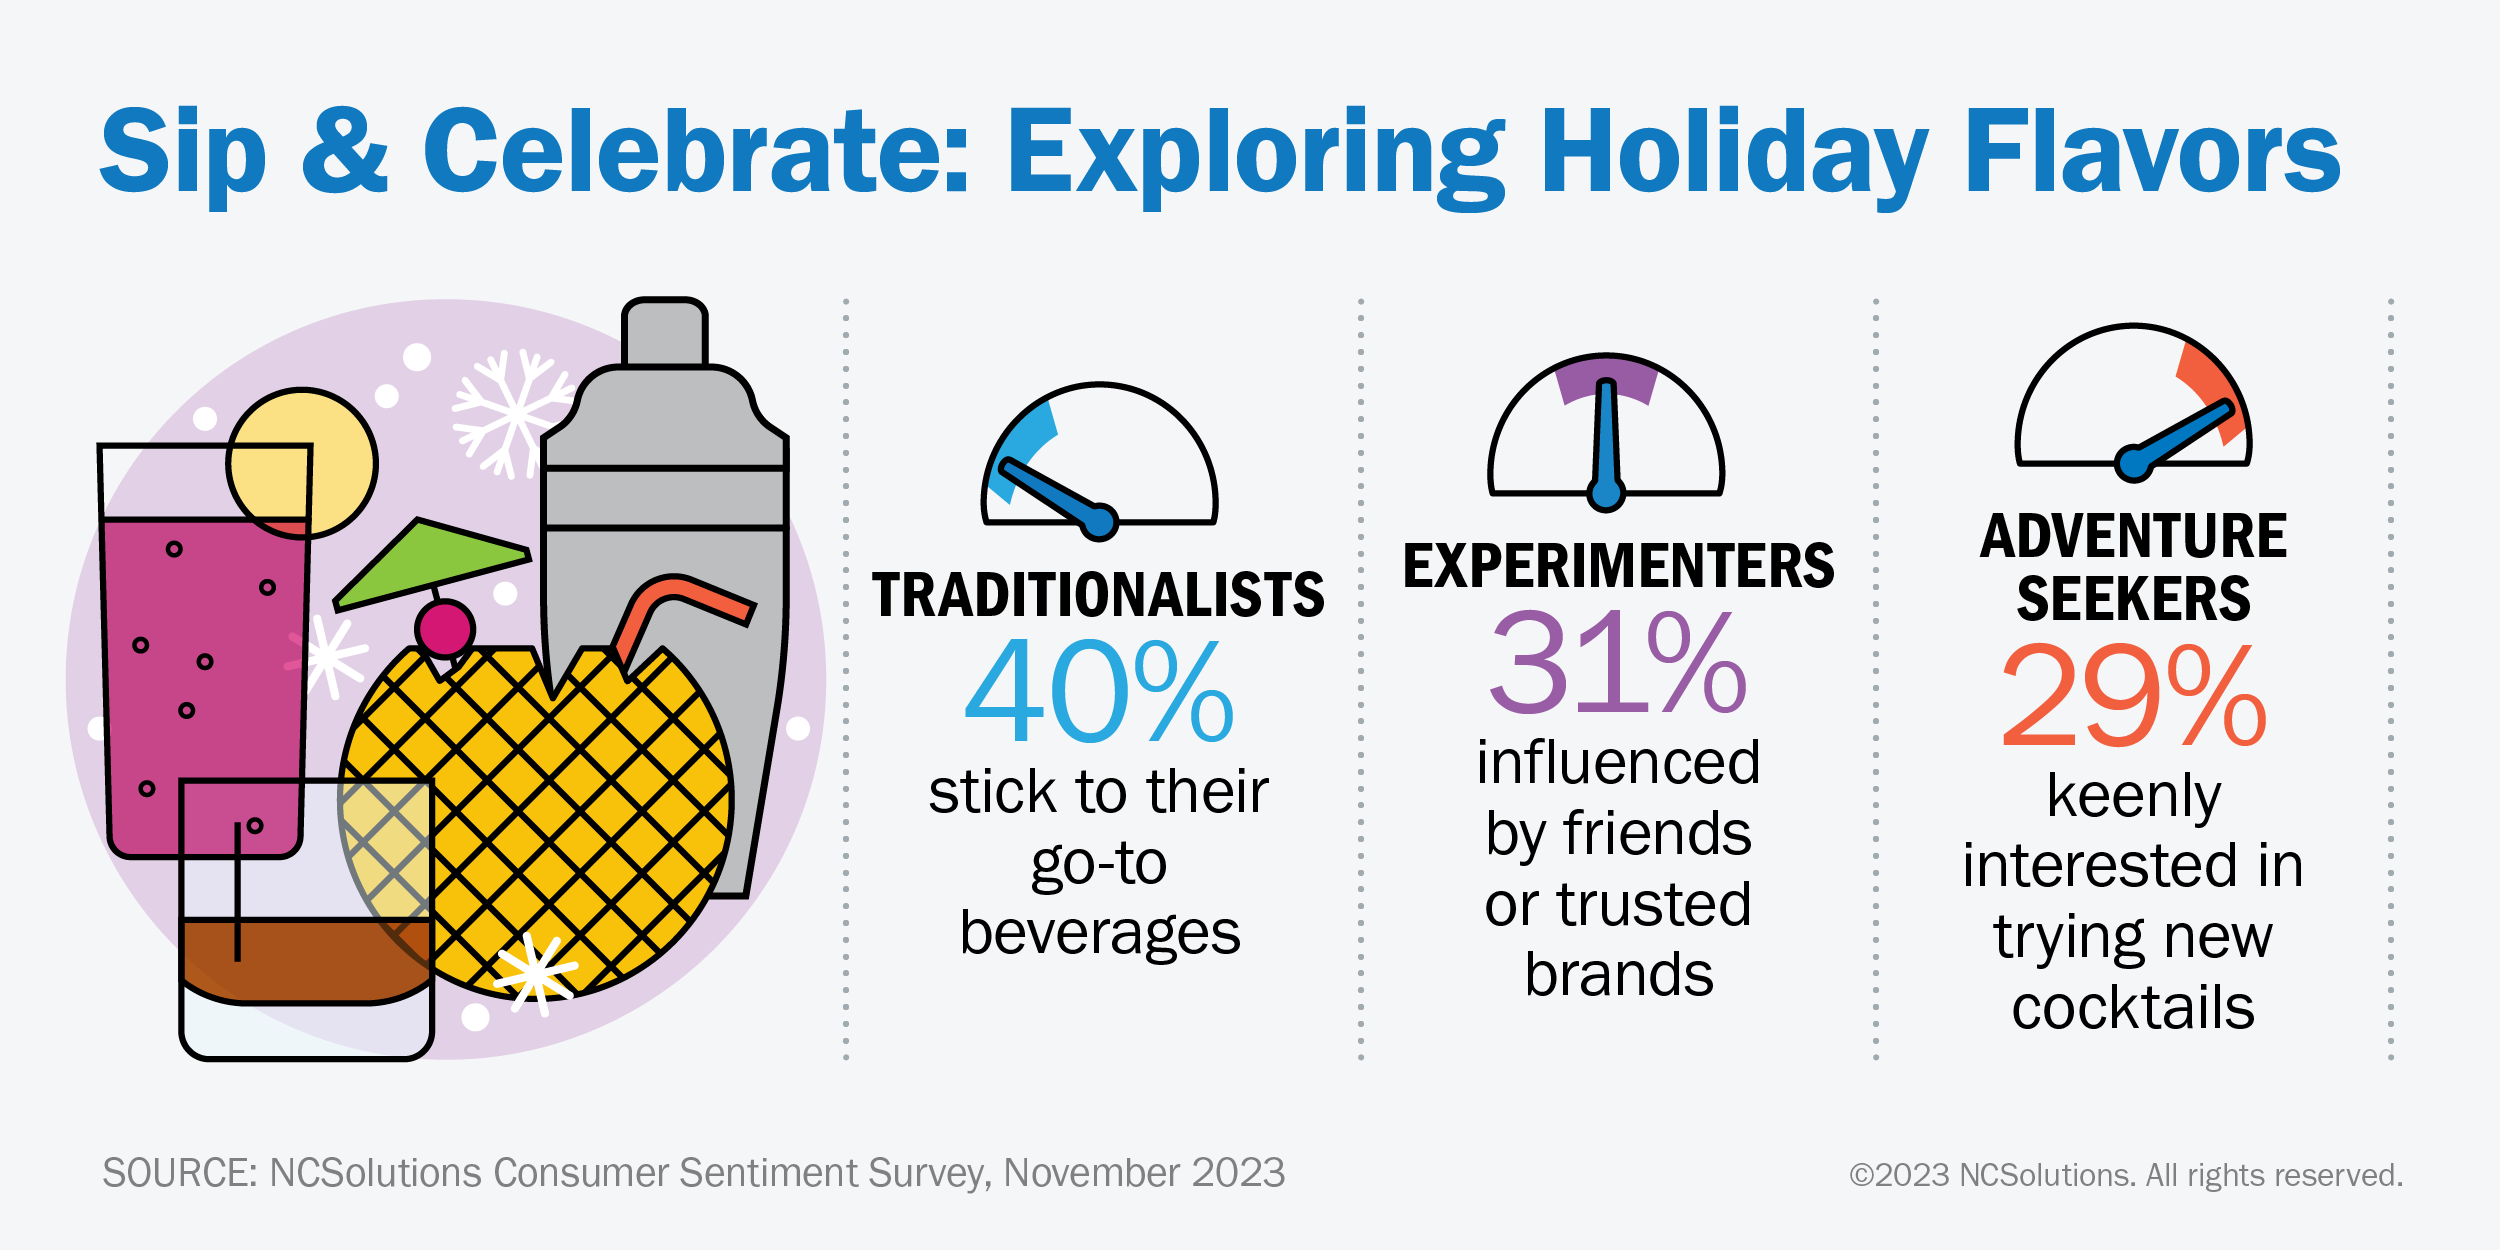 40% of Americans are traditionalists and stick to their go-to holiday beverages, followed by 31% experimenters and 29% adventure seekers who are more open to trying new flavors